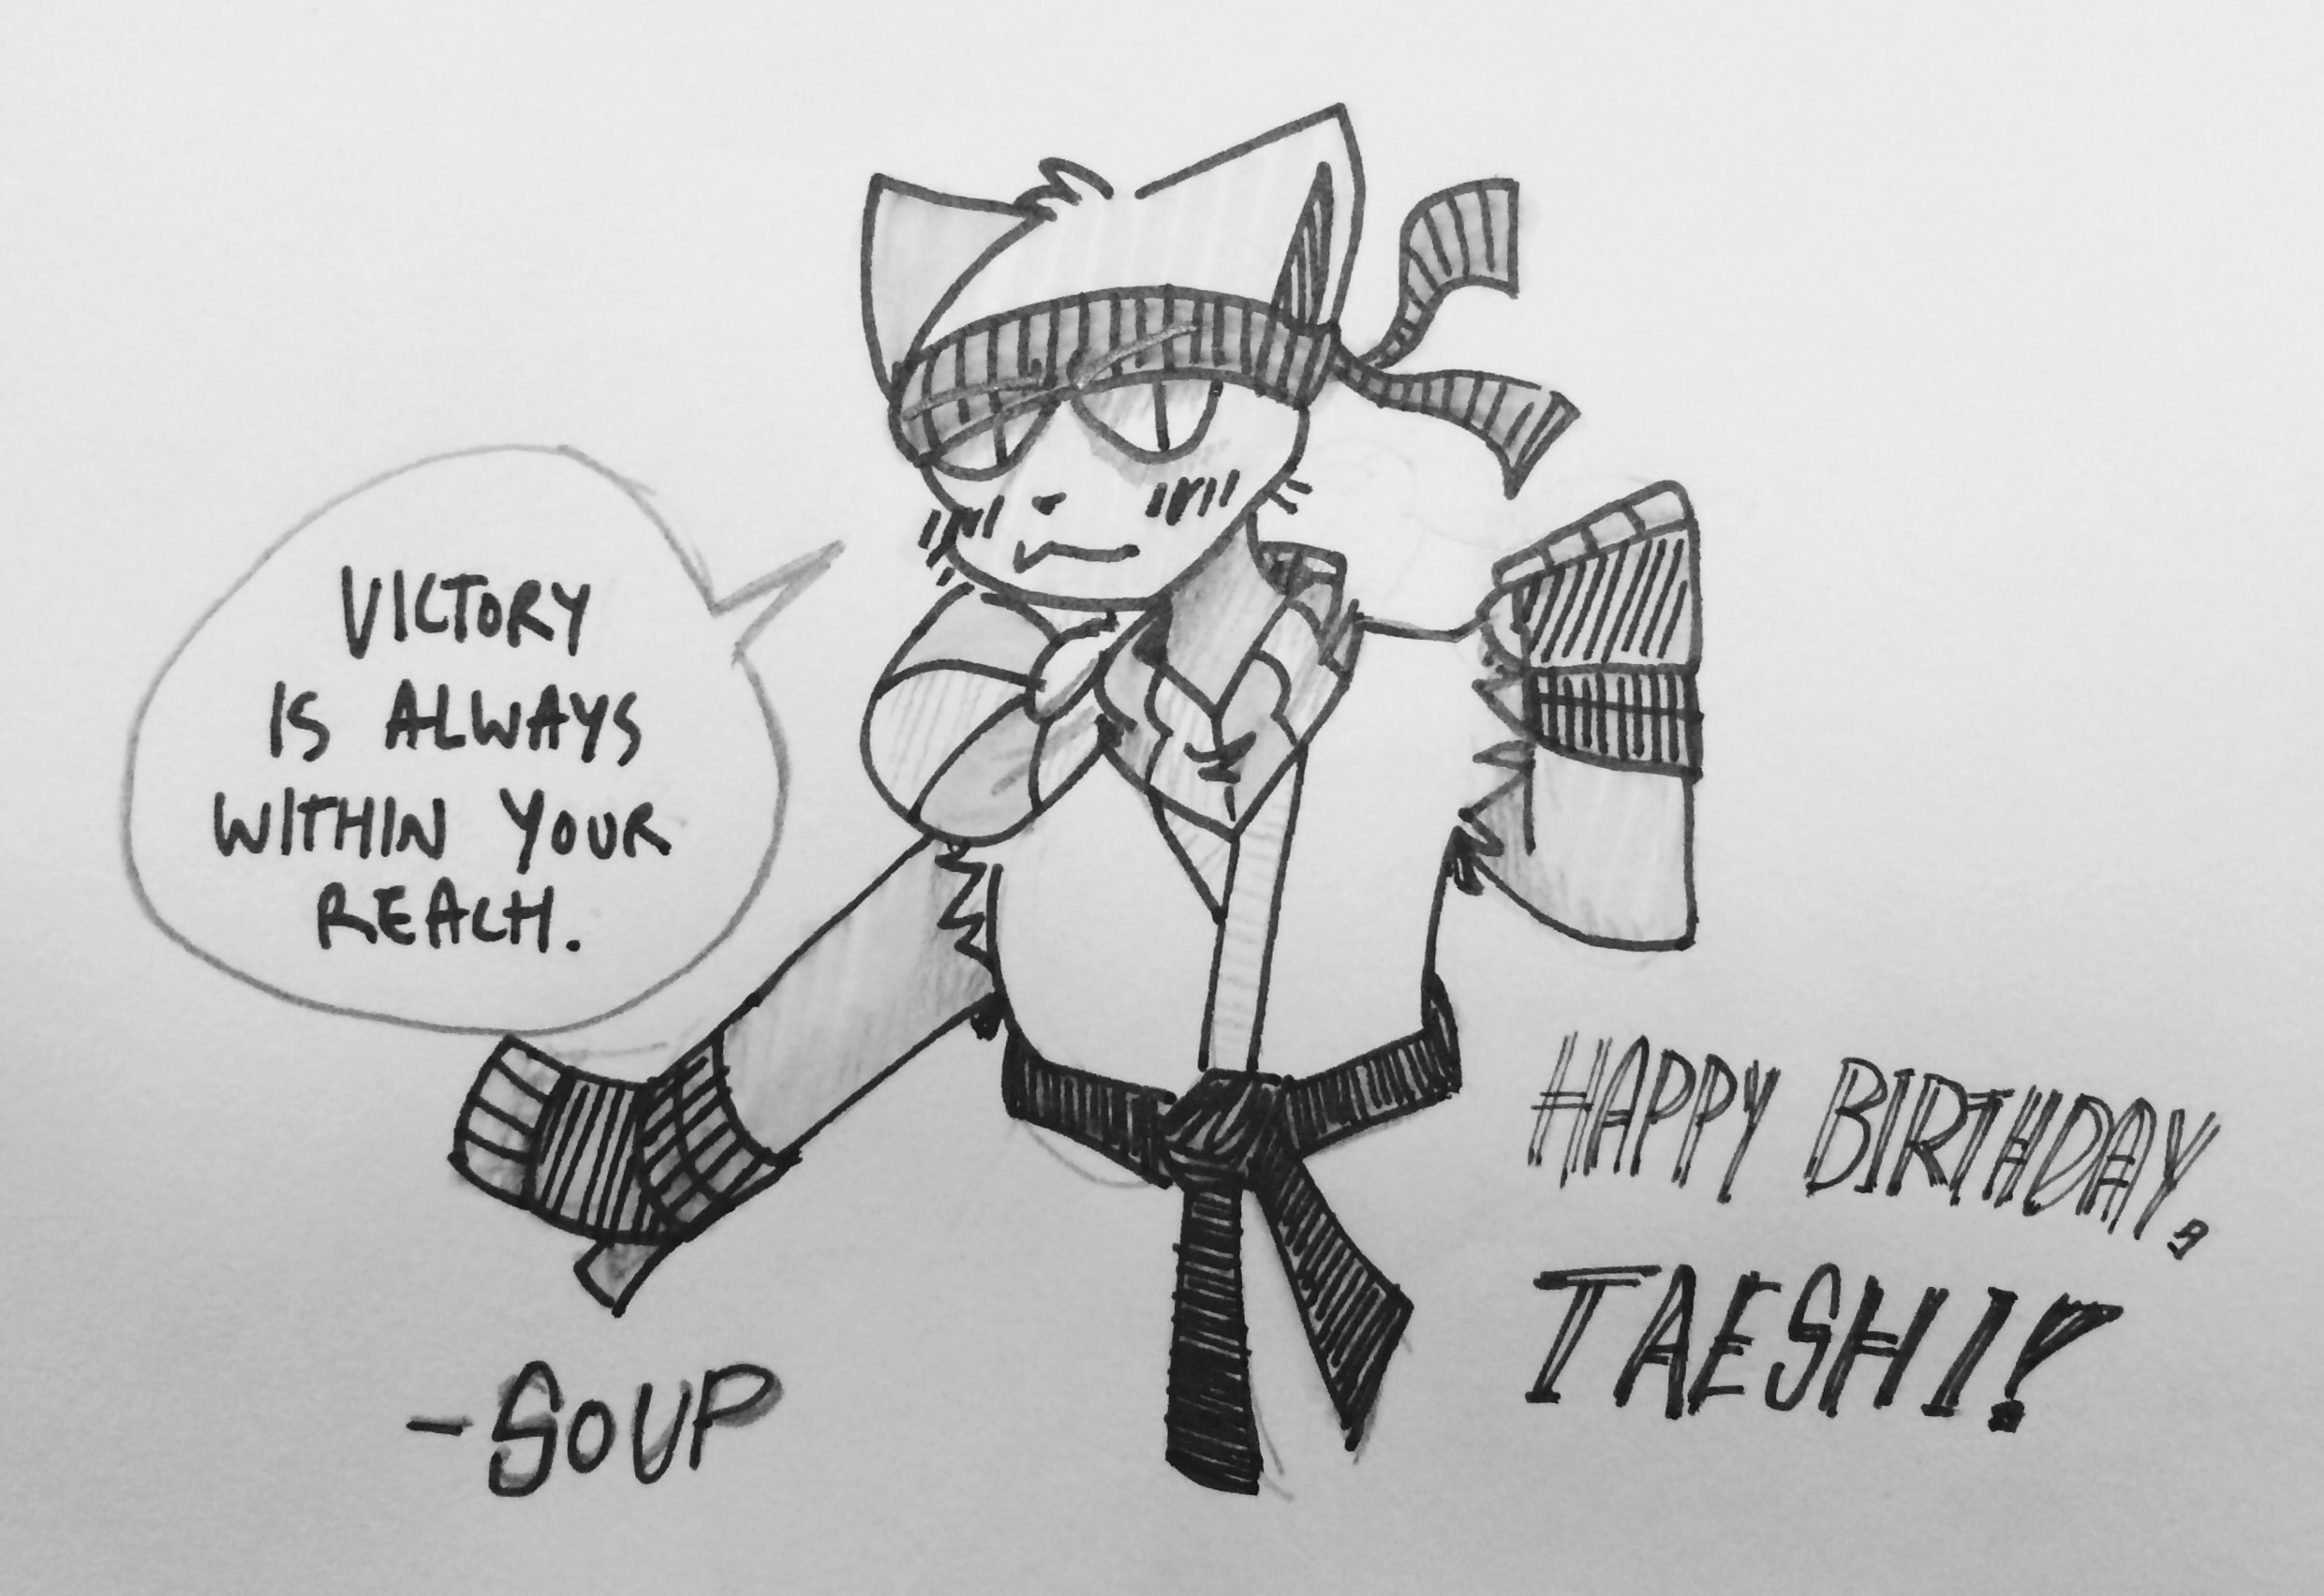 Candybooru image #9200, tagged with Mike Soup_(Artist) Taeshi birthday